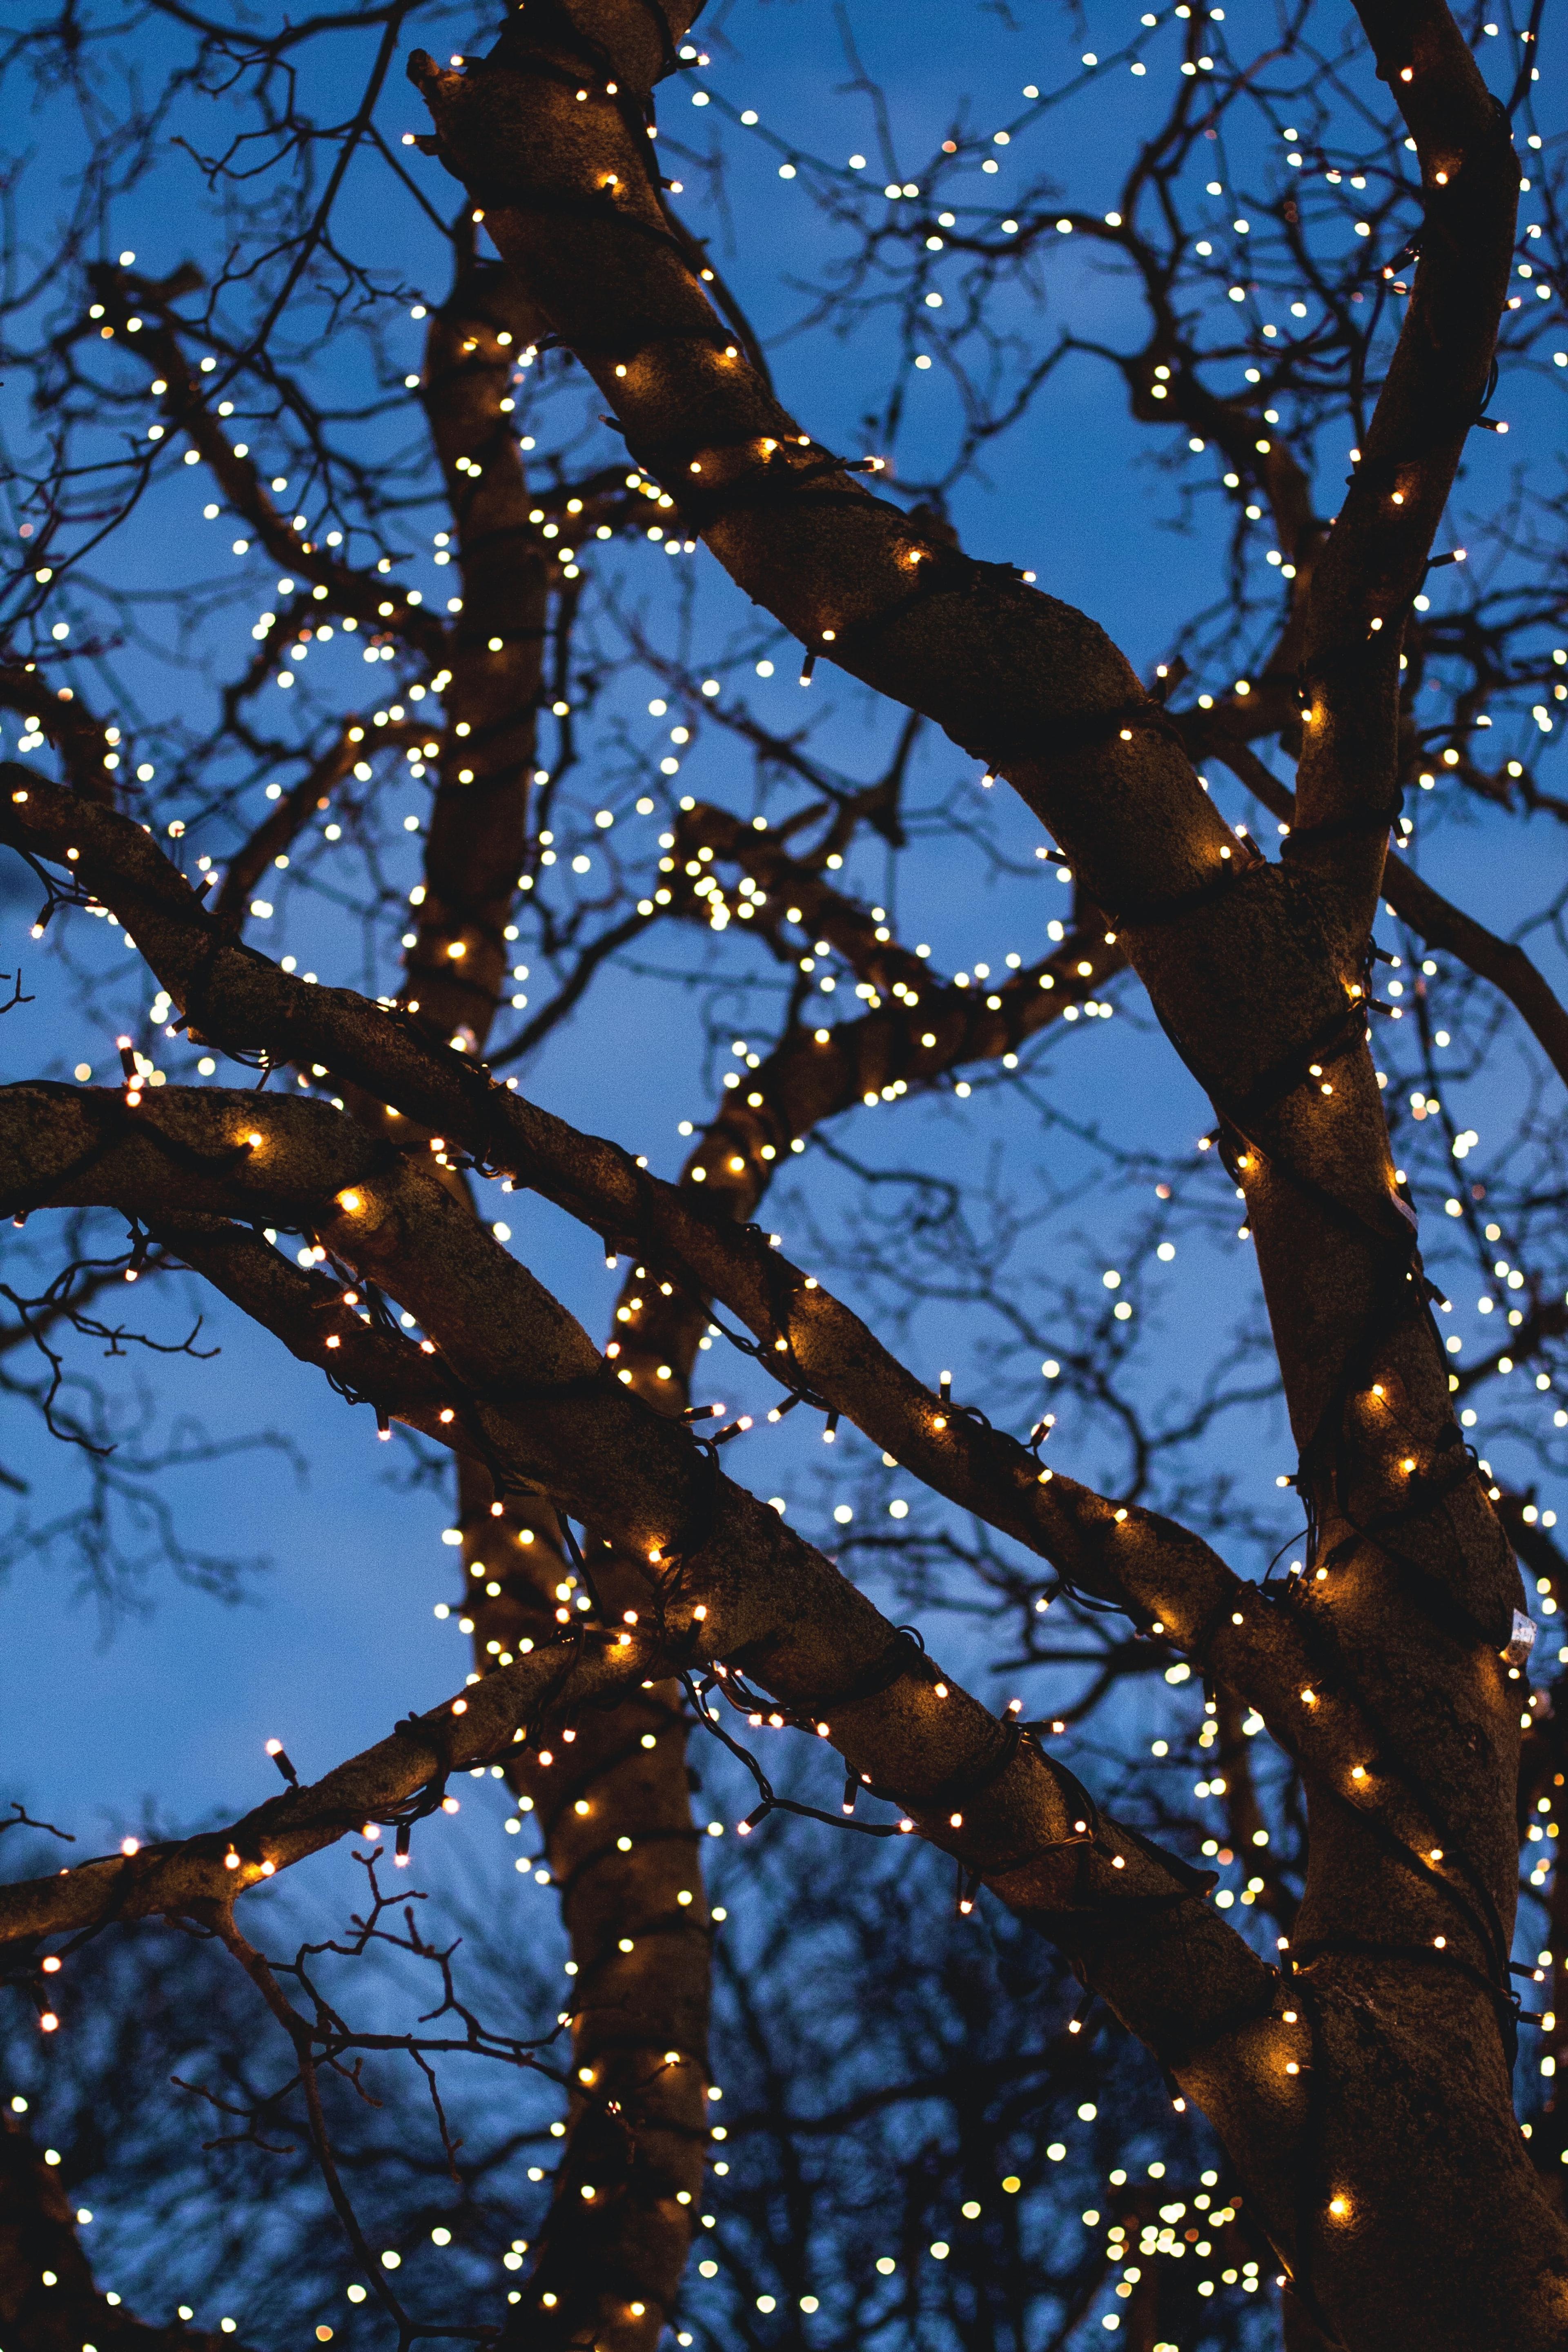 Twilight view of a bare tree in winter, its branches wrapped in twinkling string lights that cast a warm glow against the evening sky